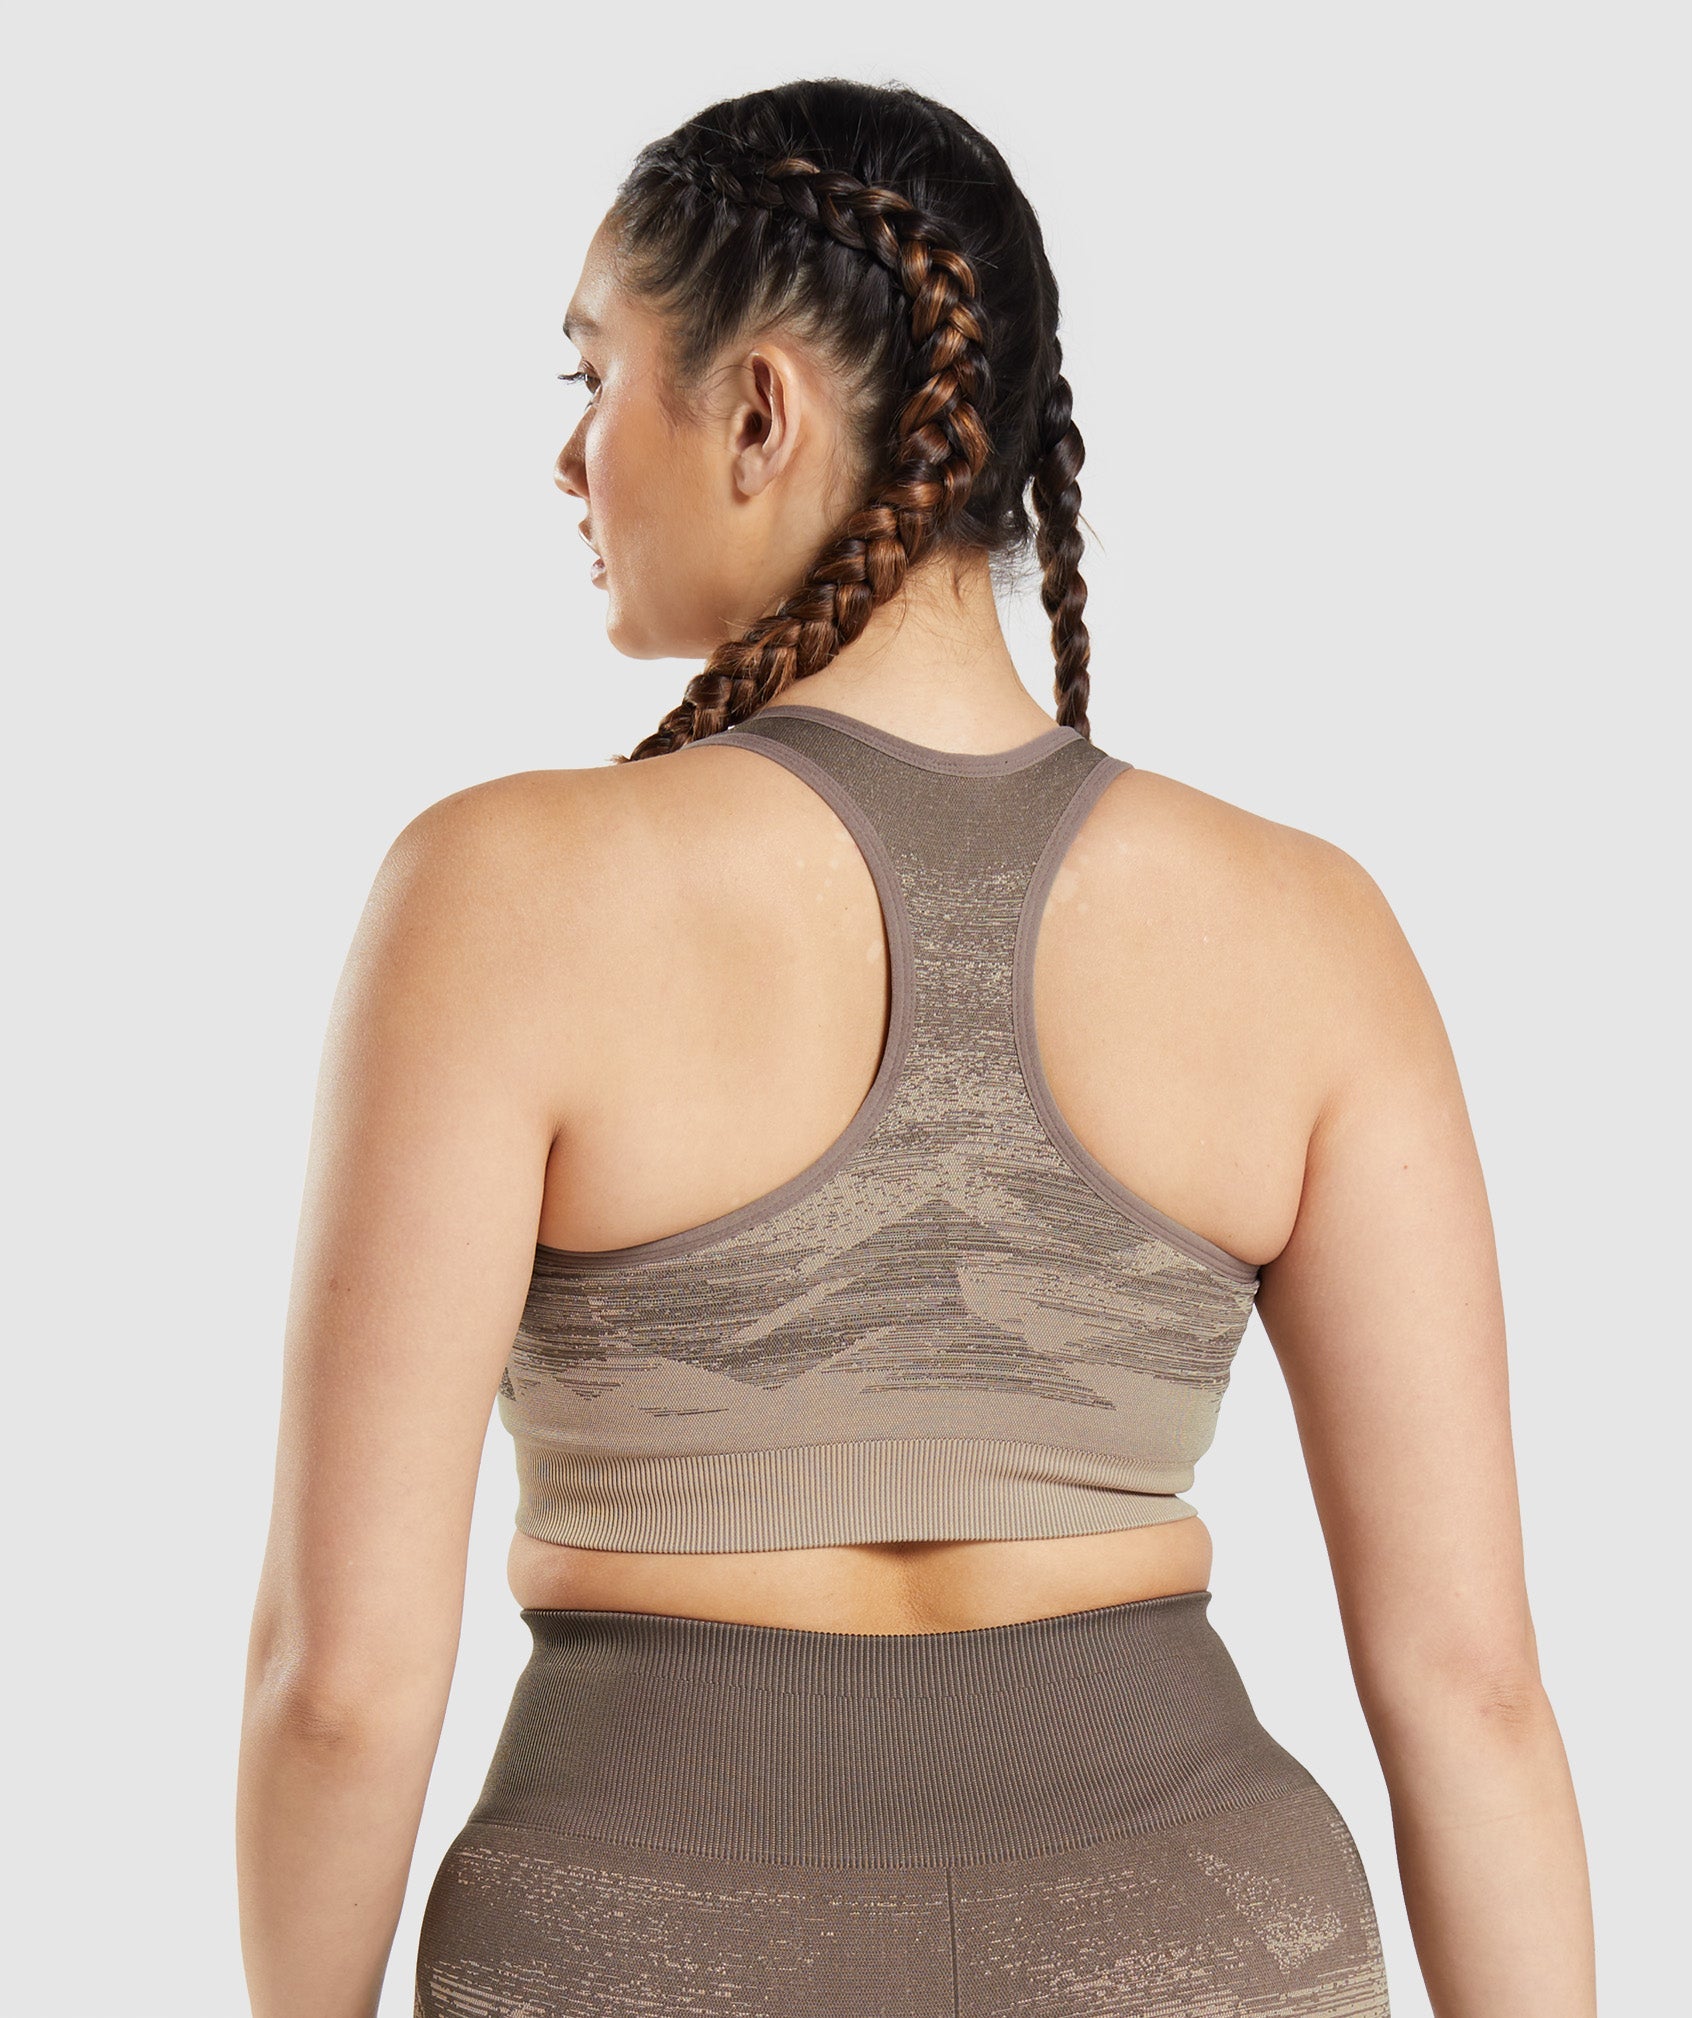 Pro-Fit Soft Touch Ombre Sports Top - Profit Outfits